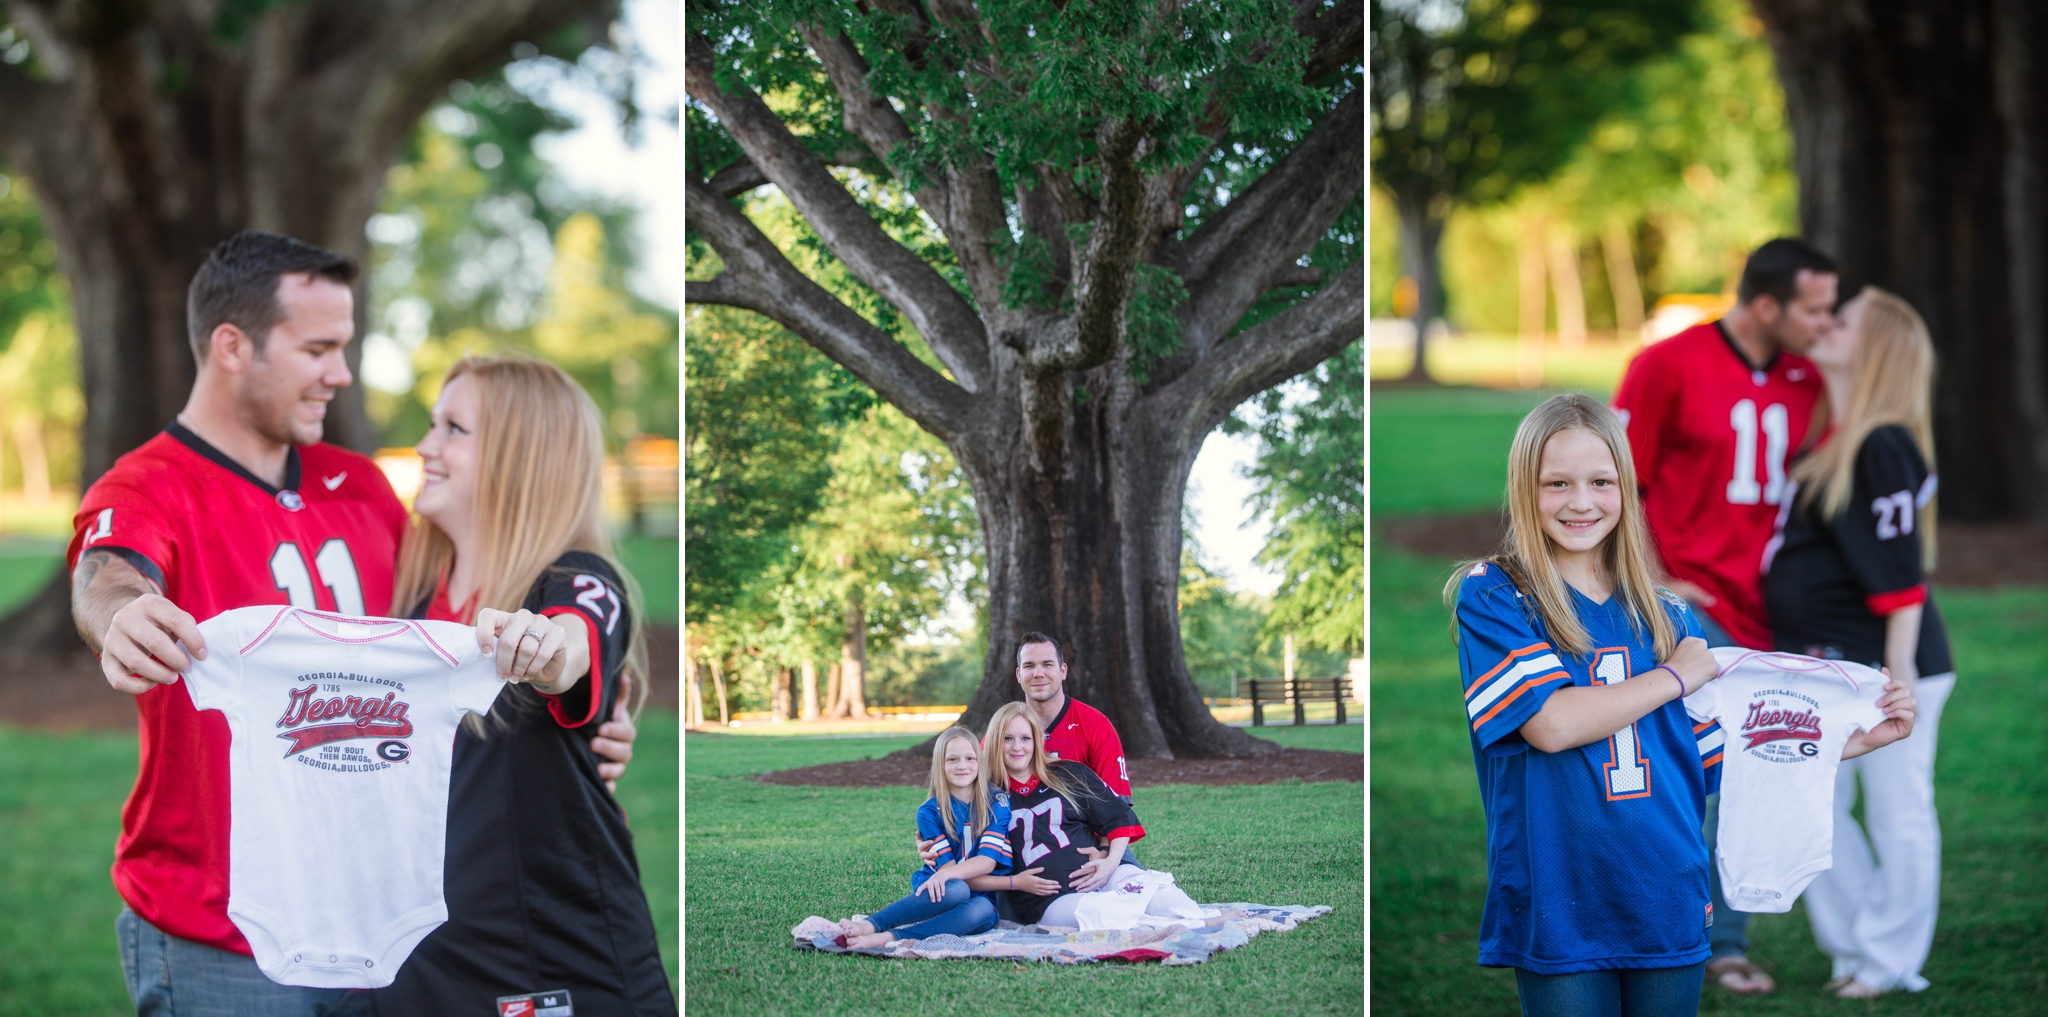 Military Family Maternity Photography Session at the FTCC Rose Garden in Fayetteville, NC - Raleigh North Carolina Photographer - Johanna Dye 